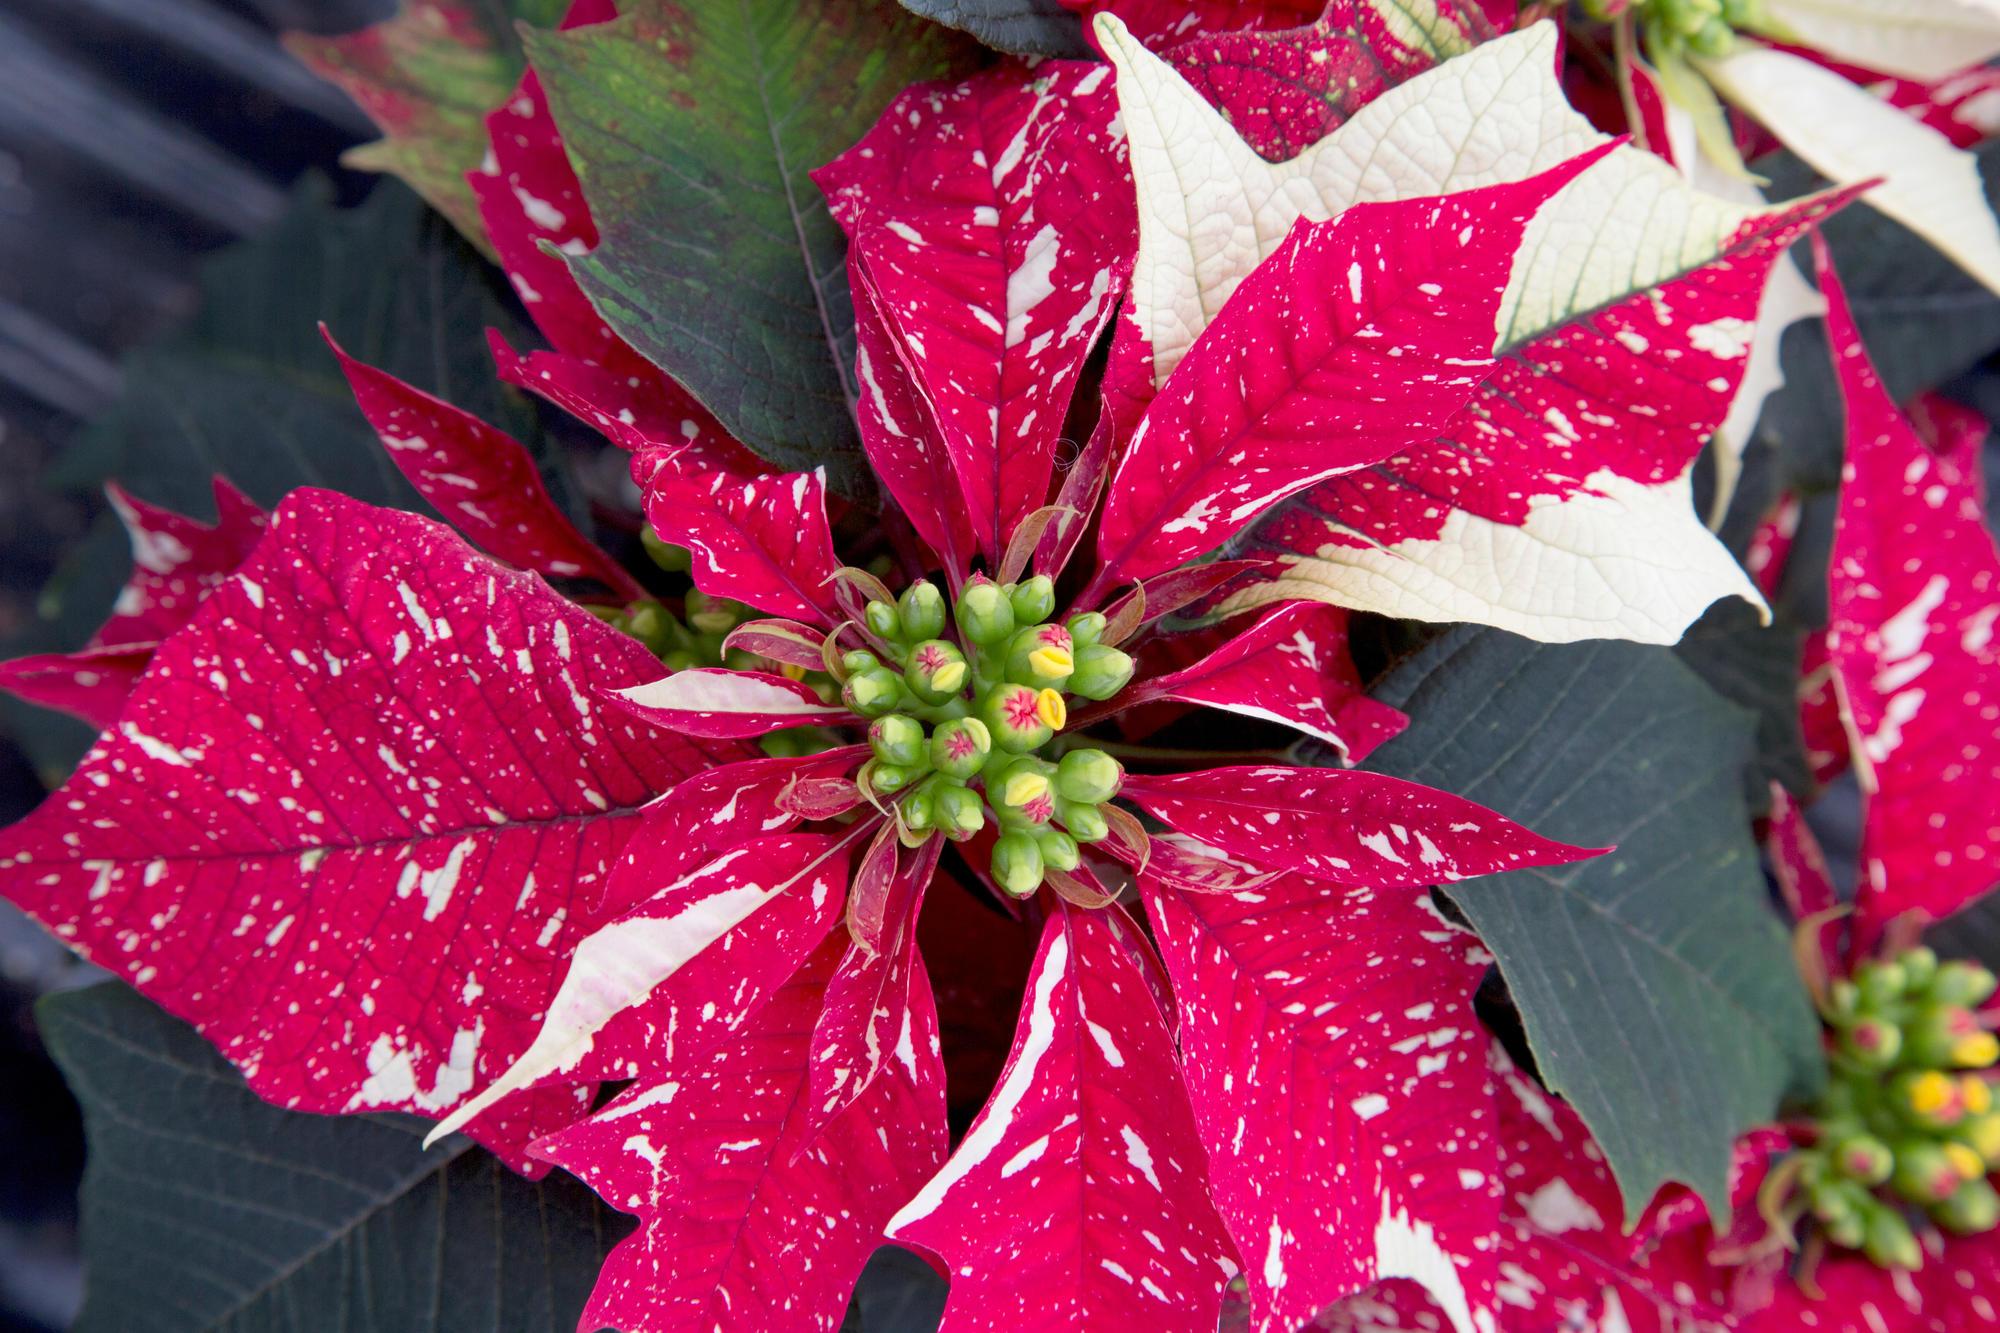 A white and red speckled poinsettia plant.